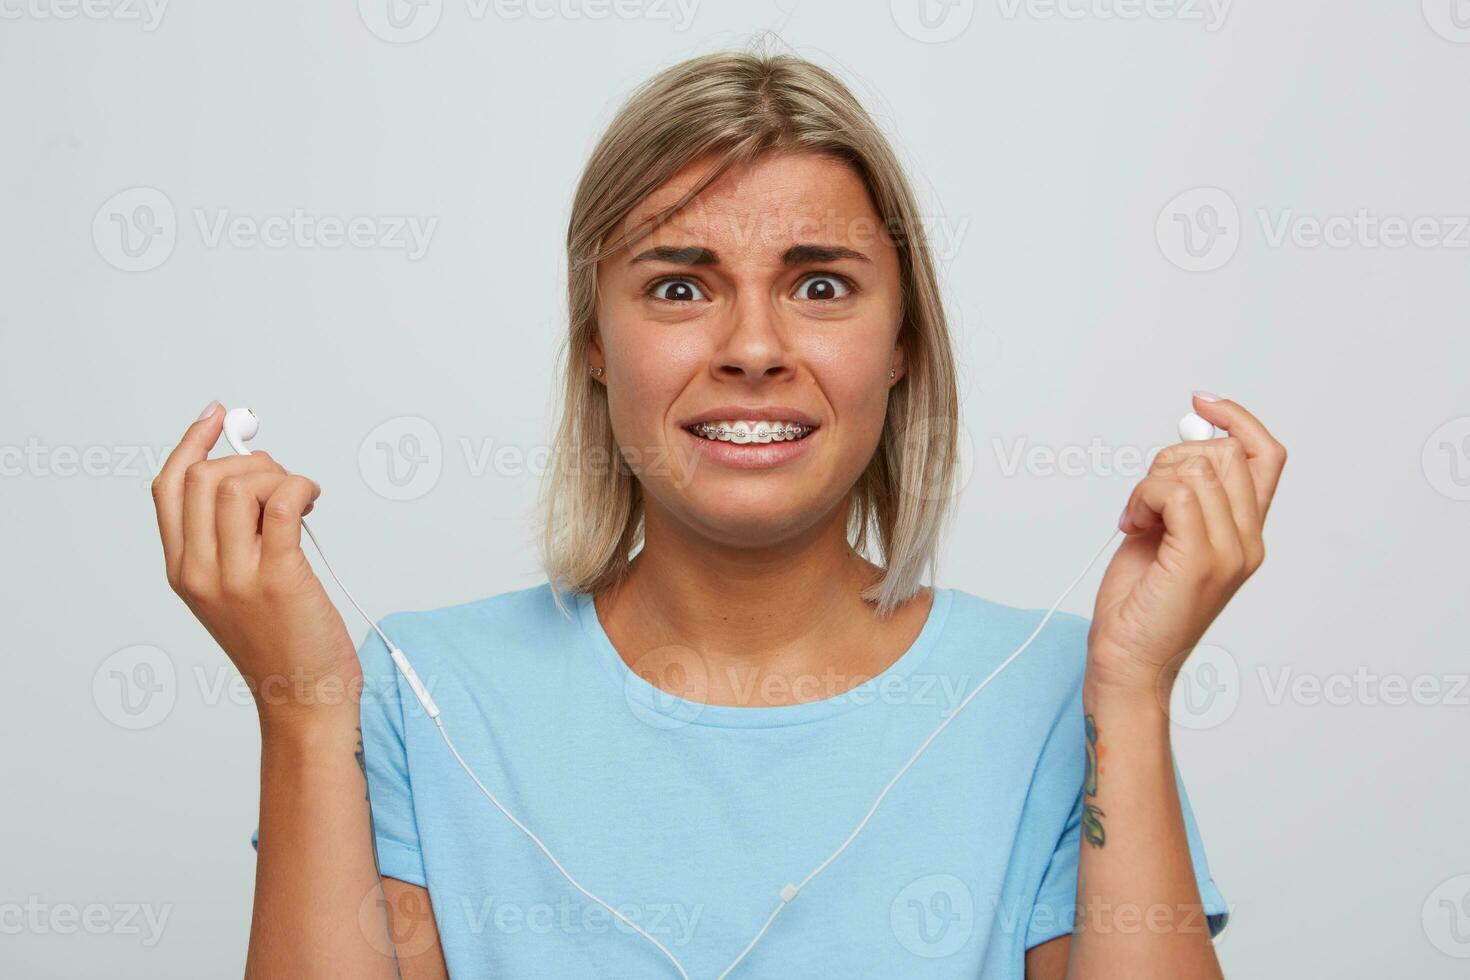 Closeup of shocked confused blonde young woman wears blue t shirt holding earphones, looks embarassed and listening to music isolated over white background photo